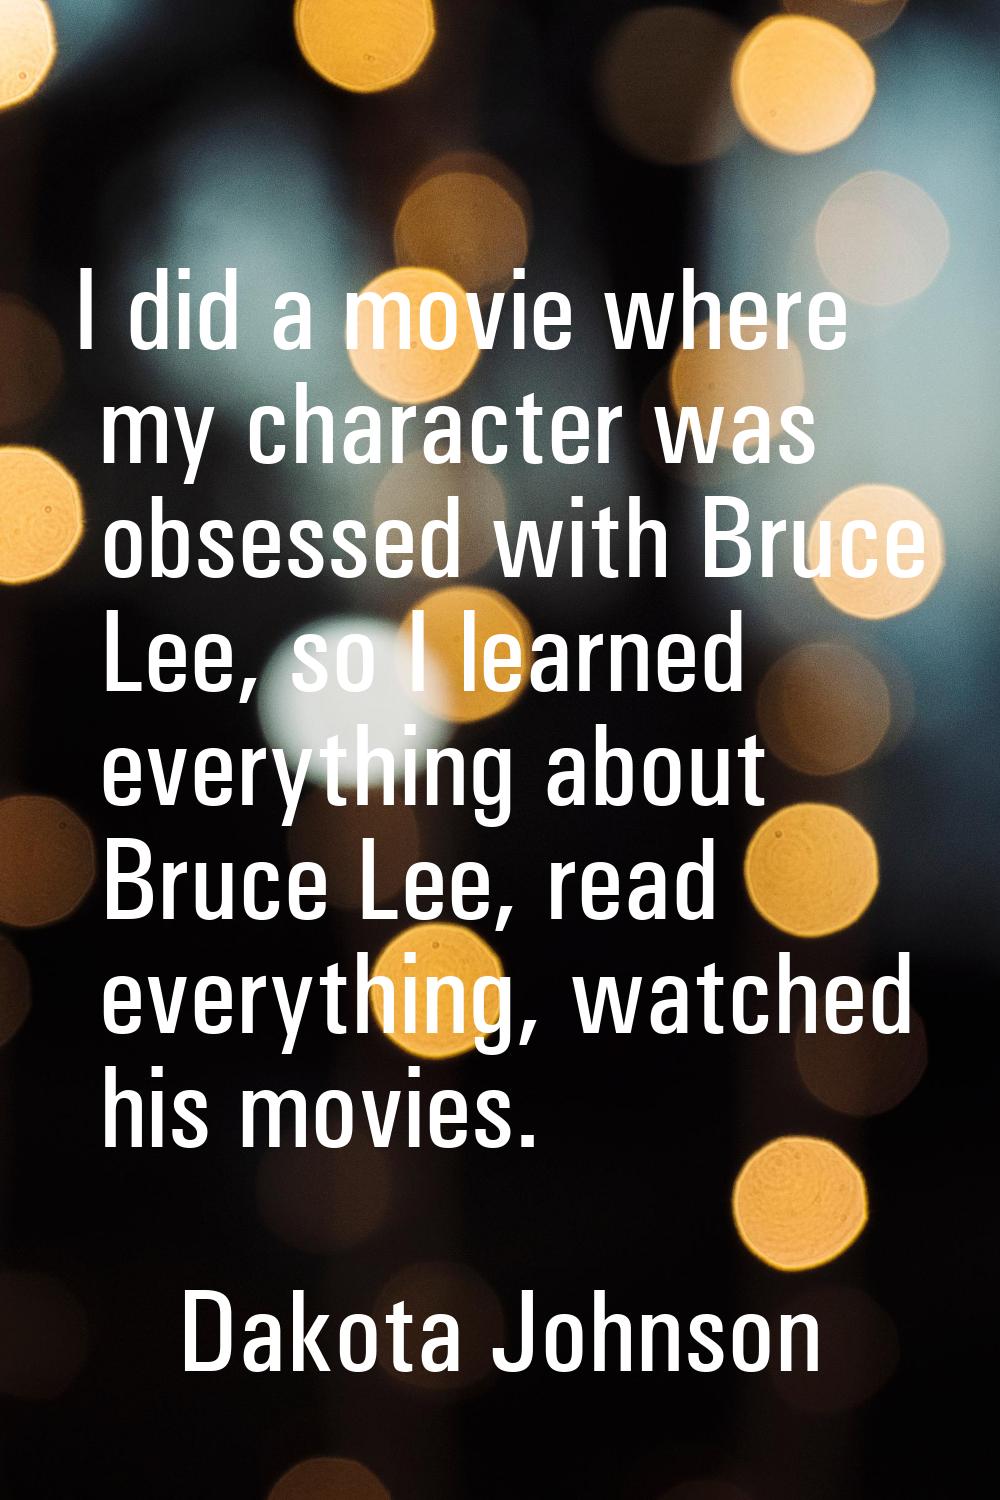 I did a movie where my character was obsessed with Bruce Lee, so I learned everything about Bruce L